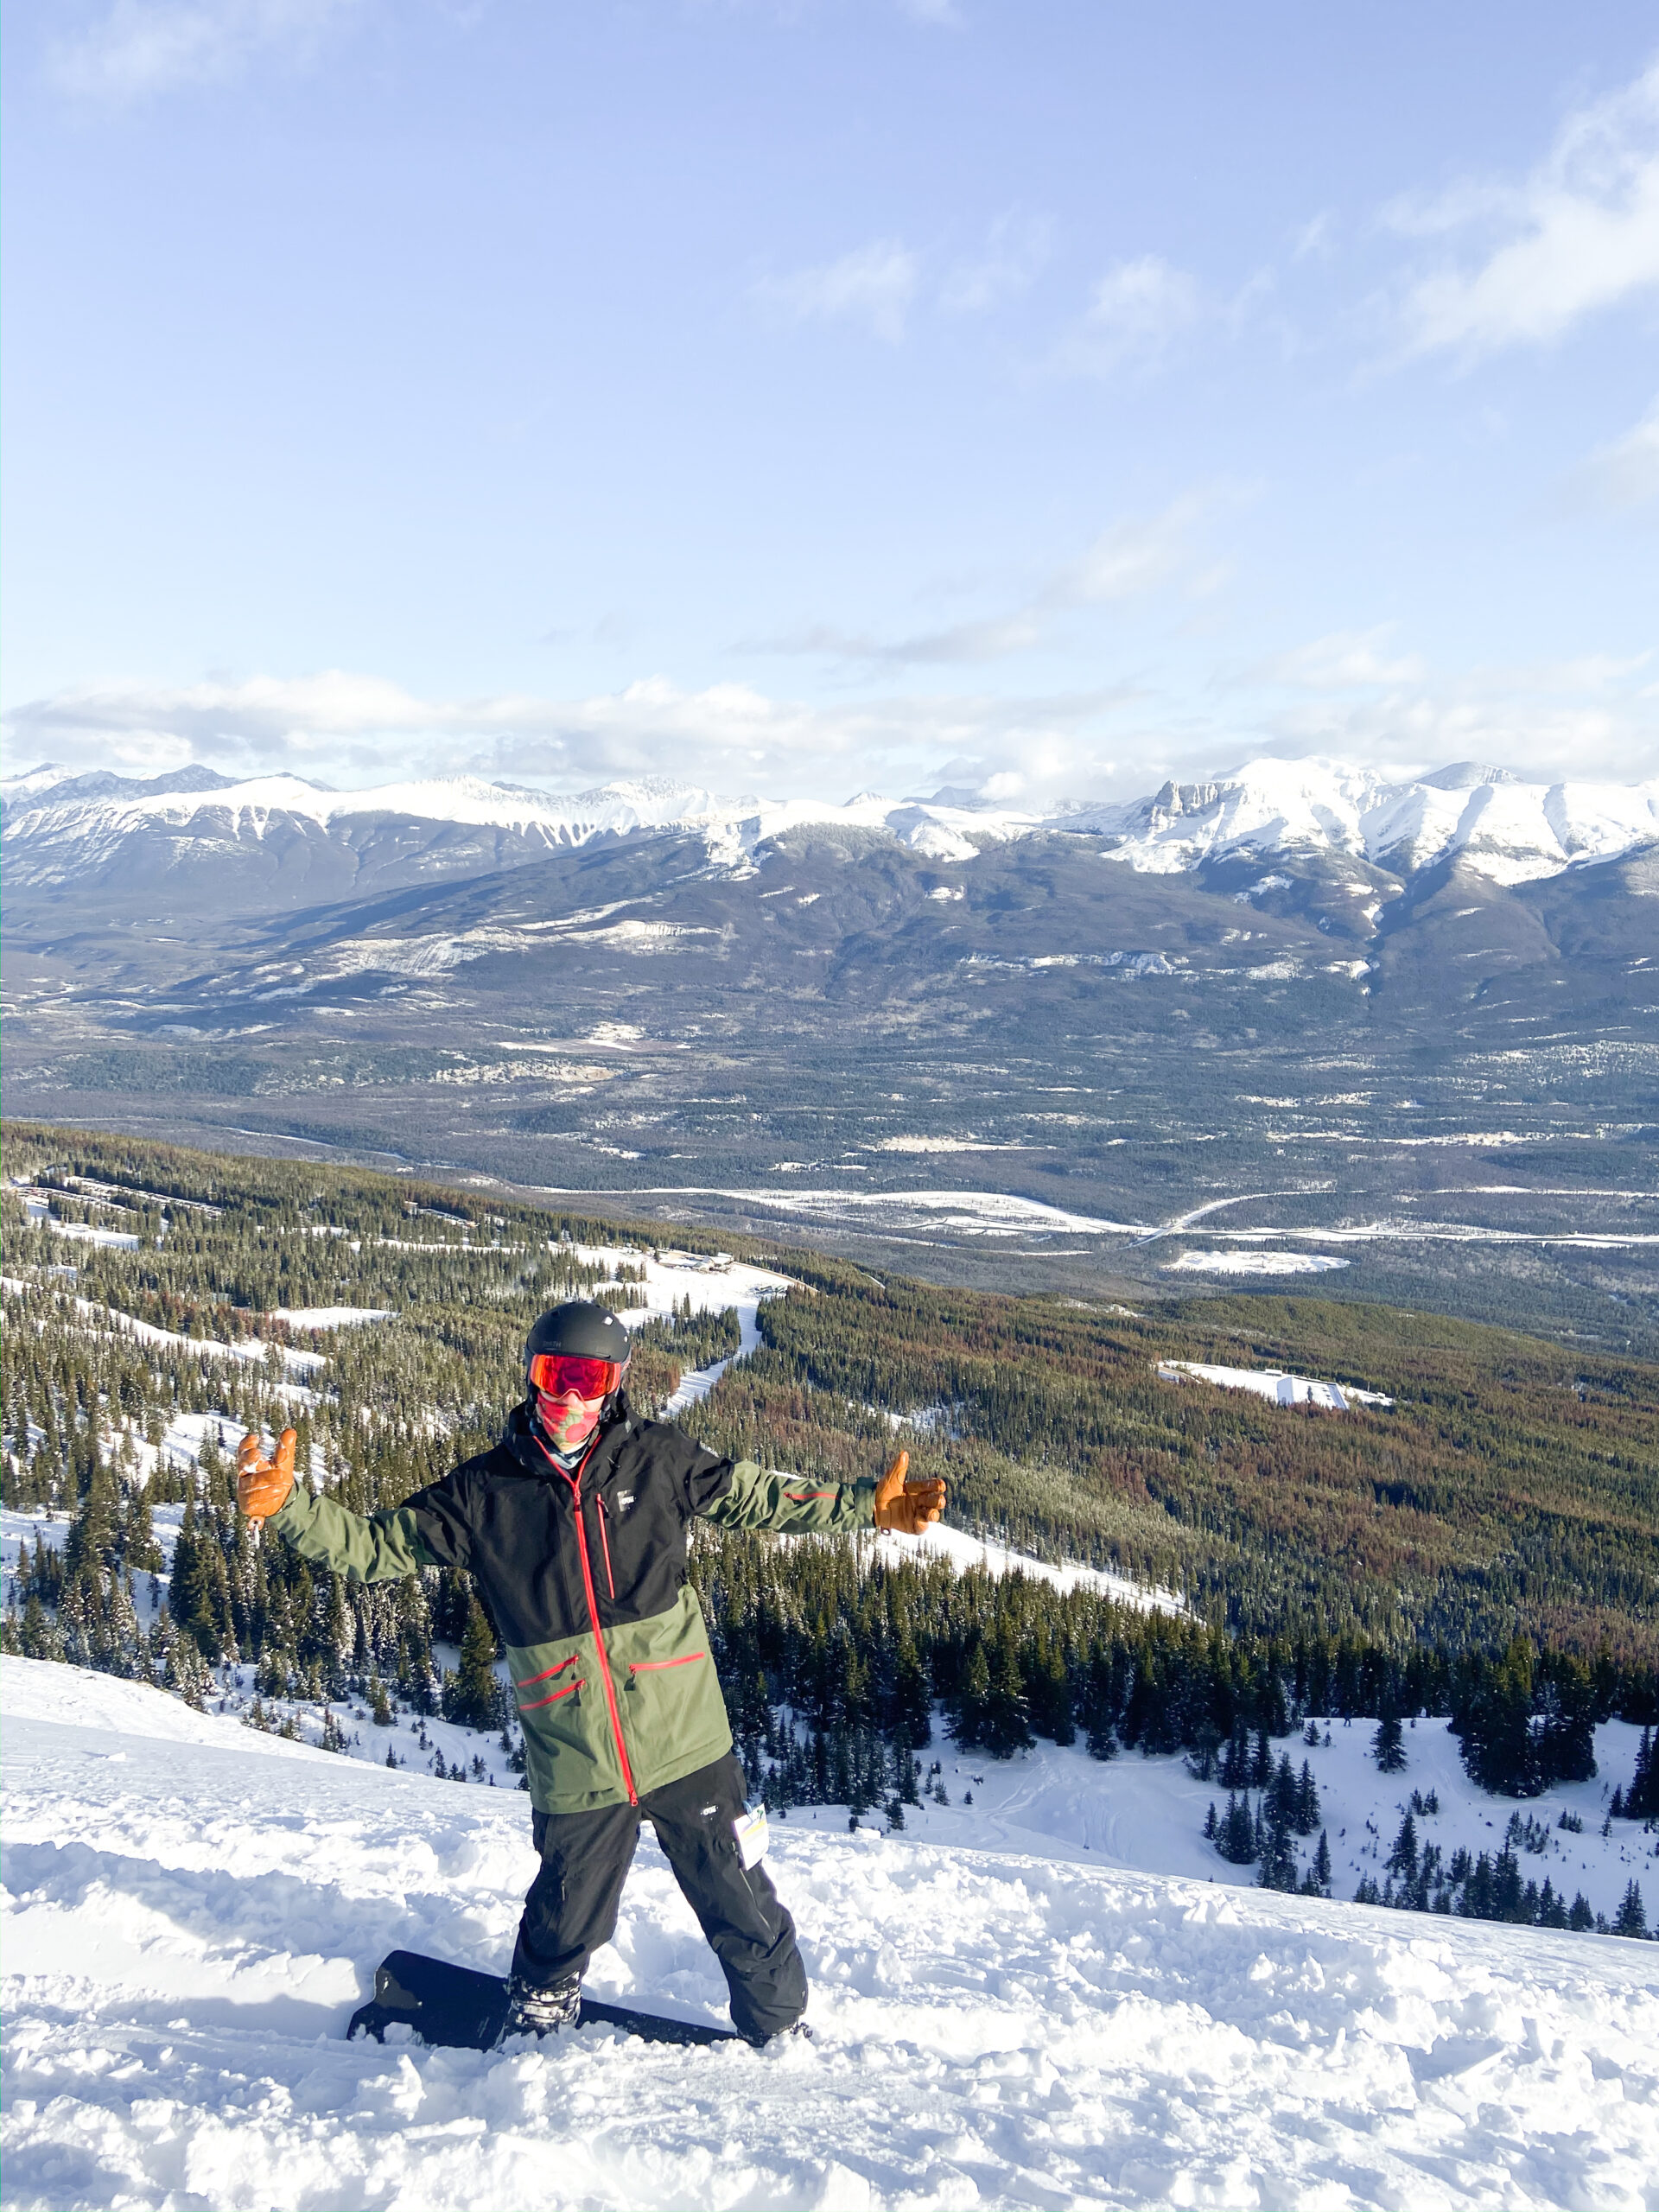 Snowboarding at Marmot Basin in Jasper National Park is an awesome winter activity 